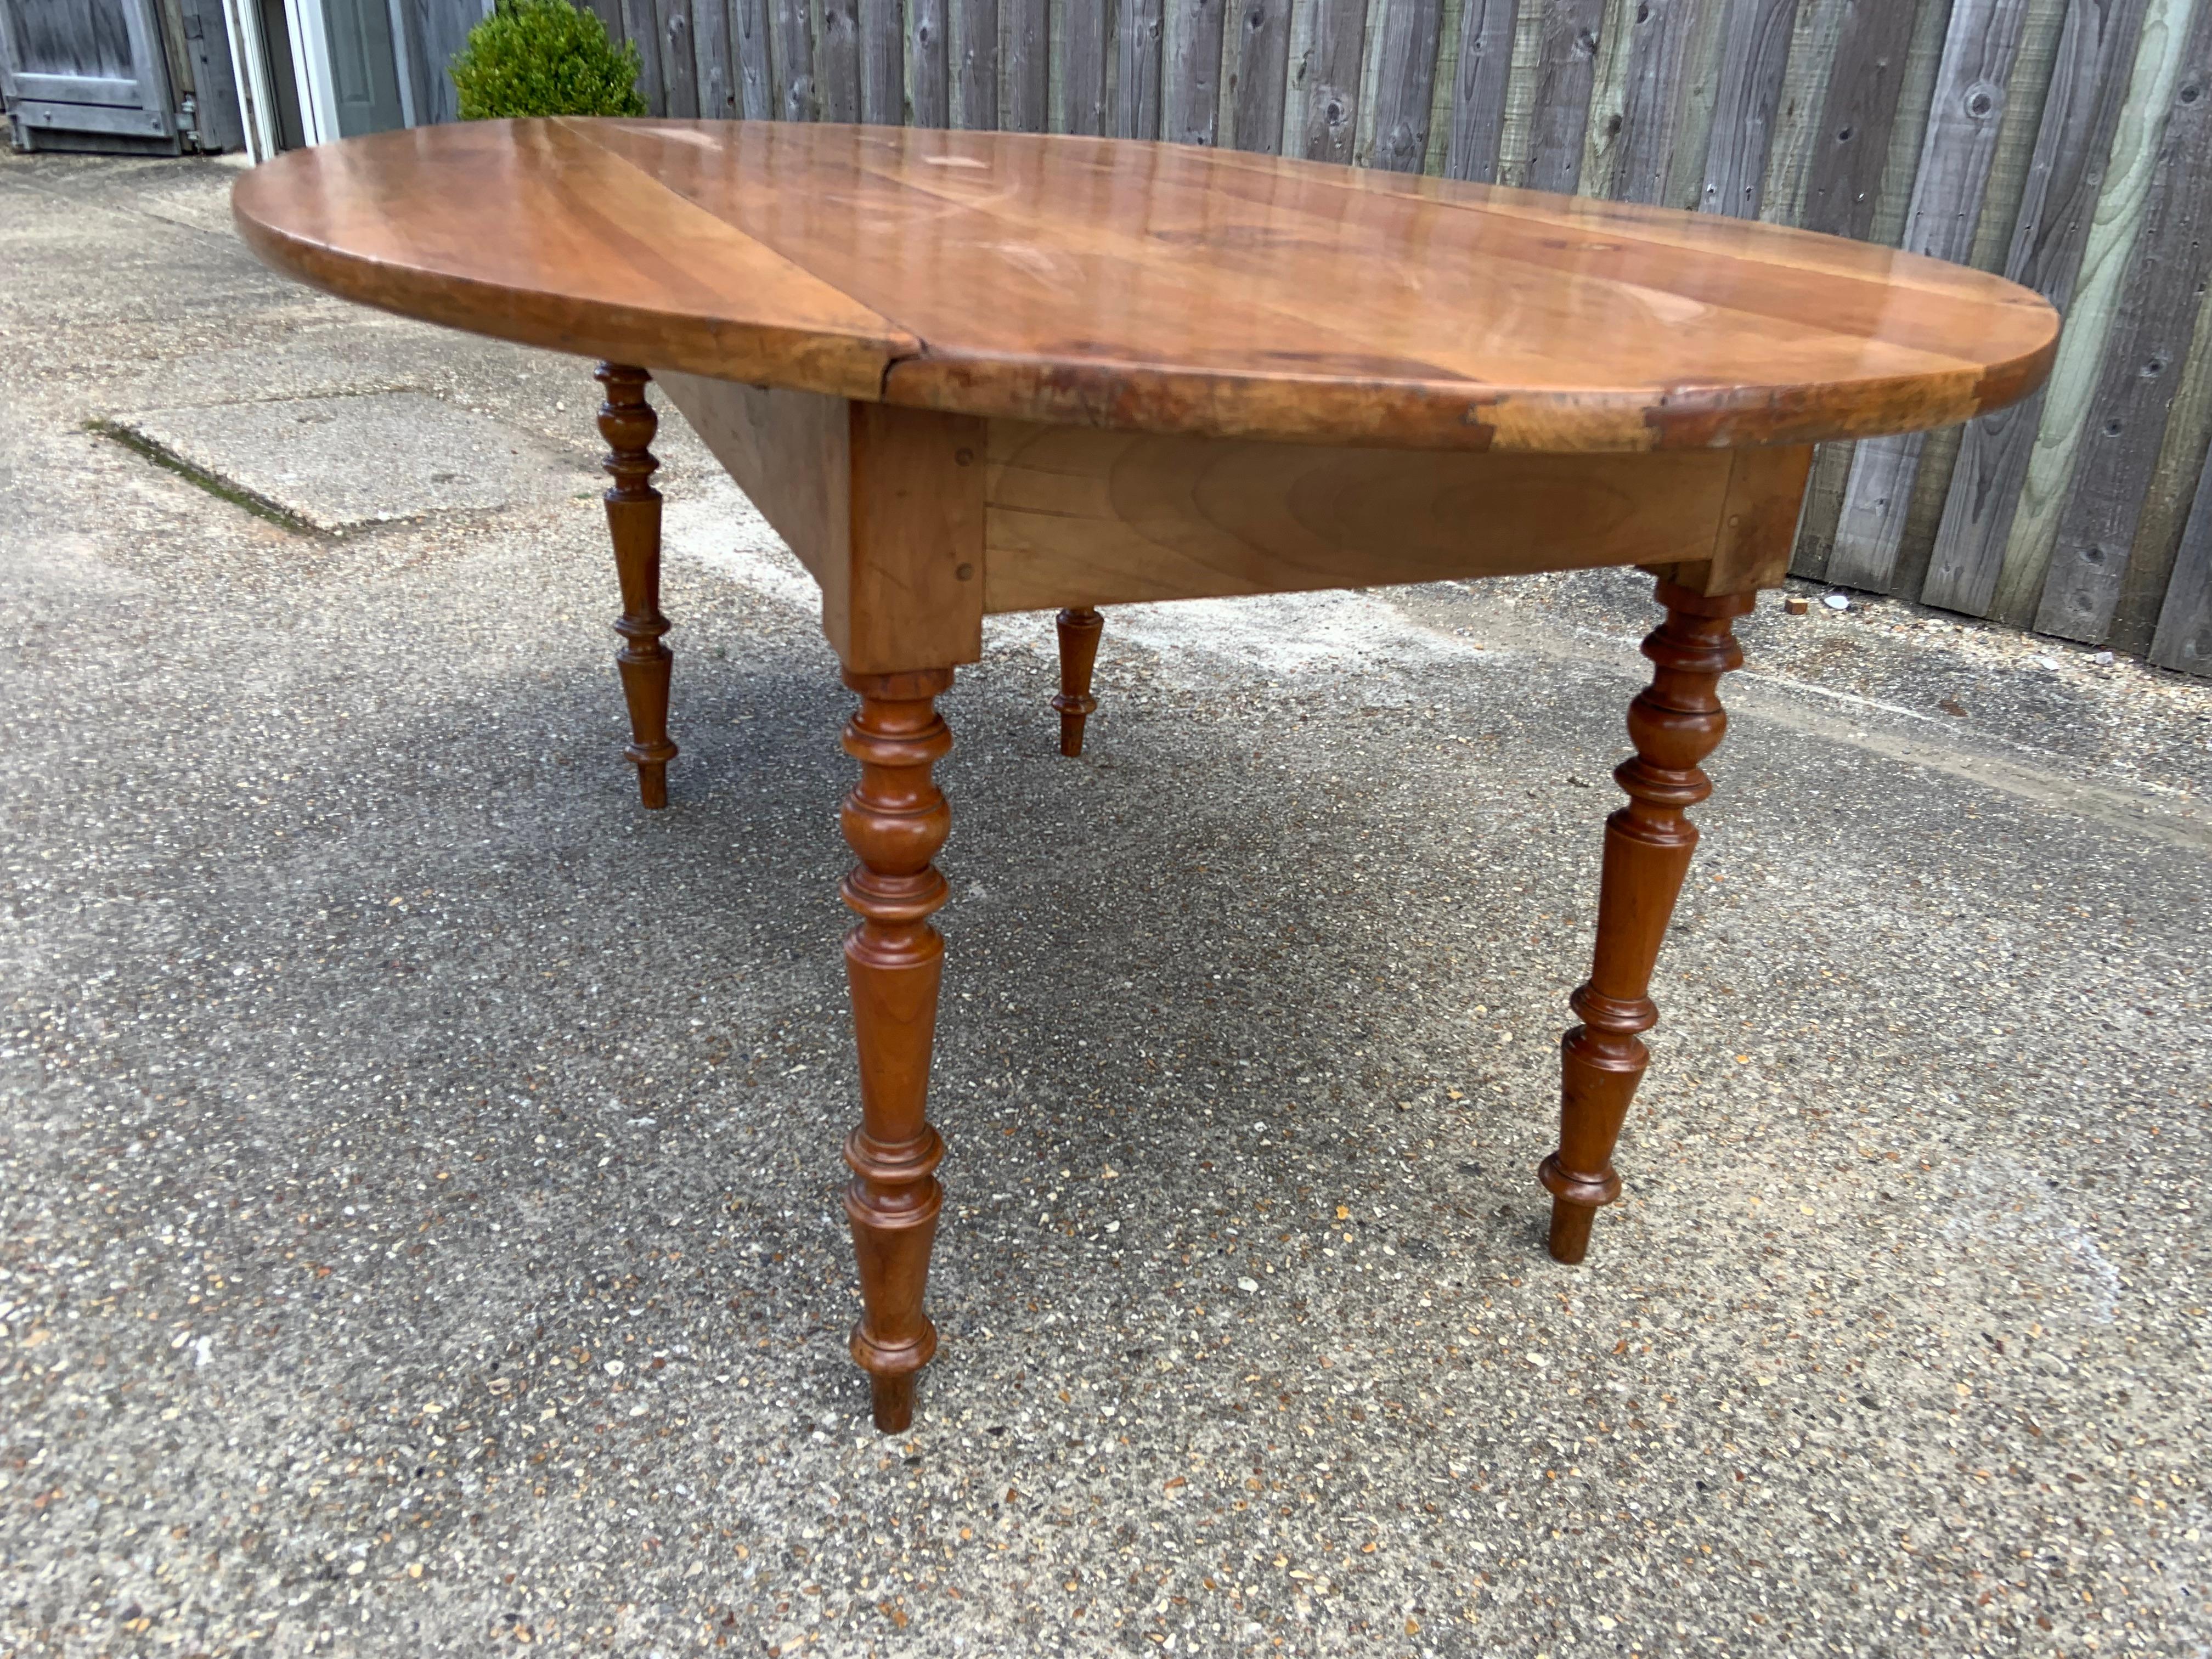 Hand-Crafted Antique Cherry Tapered Leg Oval Drop Leaf Table For Sale